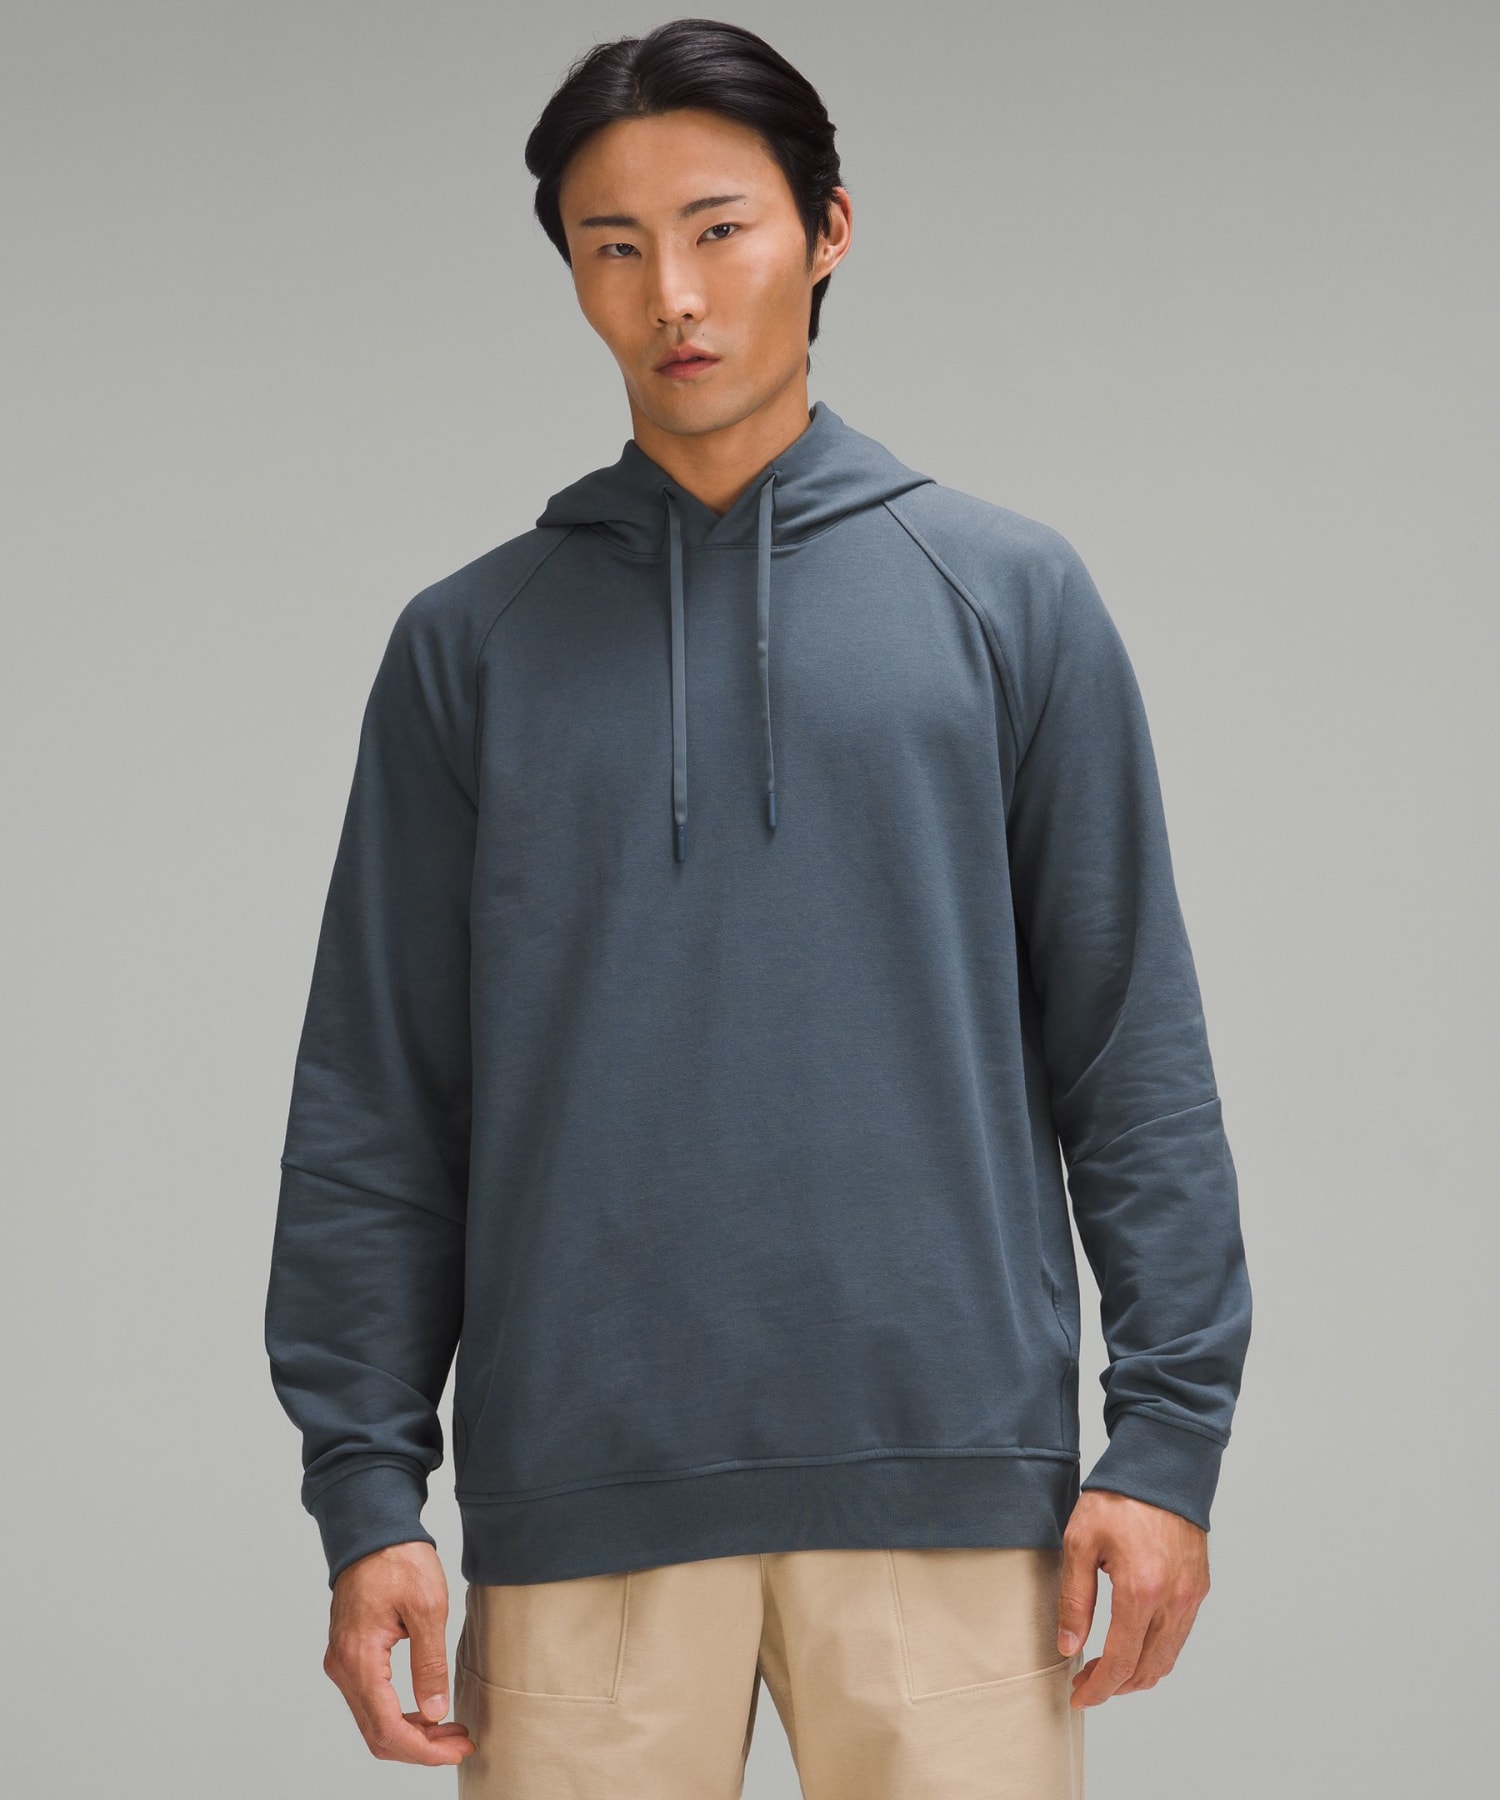 Comfy Dads Rejoice: Shop lululemon For Father's Day For His New